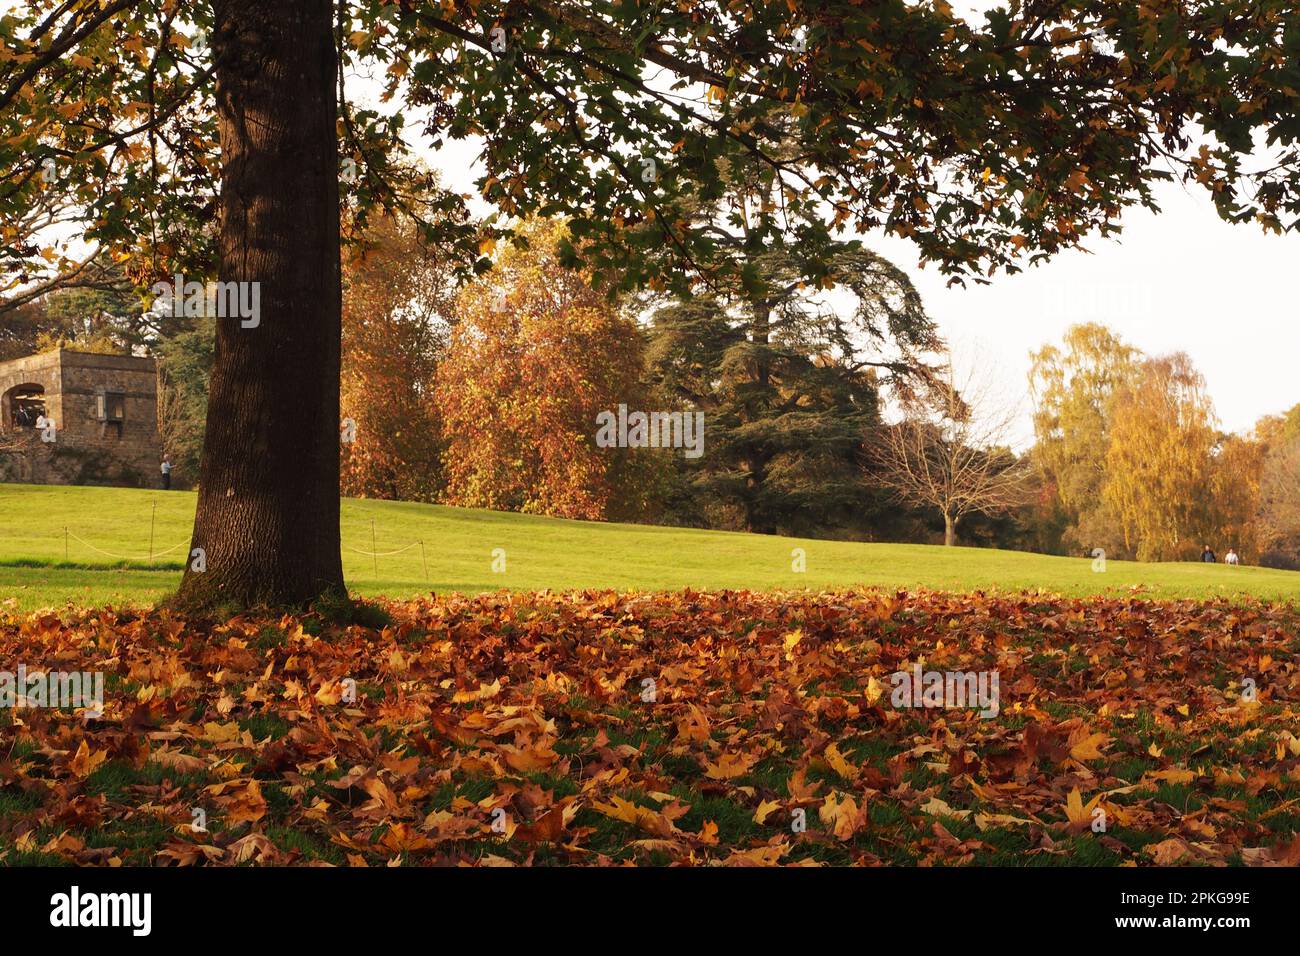 A low down autumn shot looking across an autumn garden lawn with fallen leaves on grass and a autumn coloured trees in the background Stock Photo